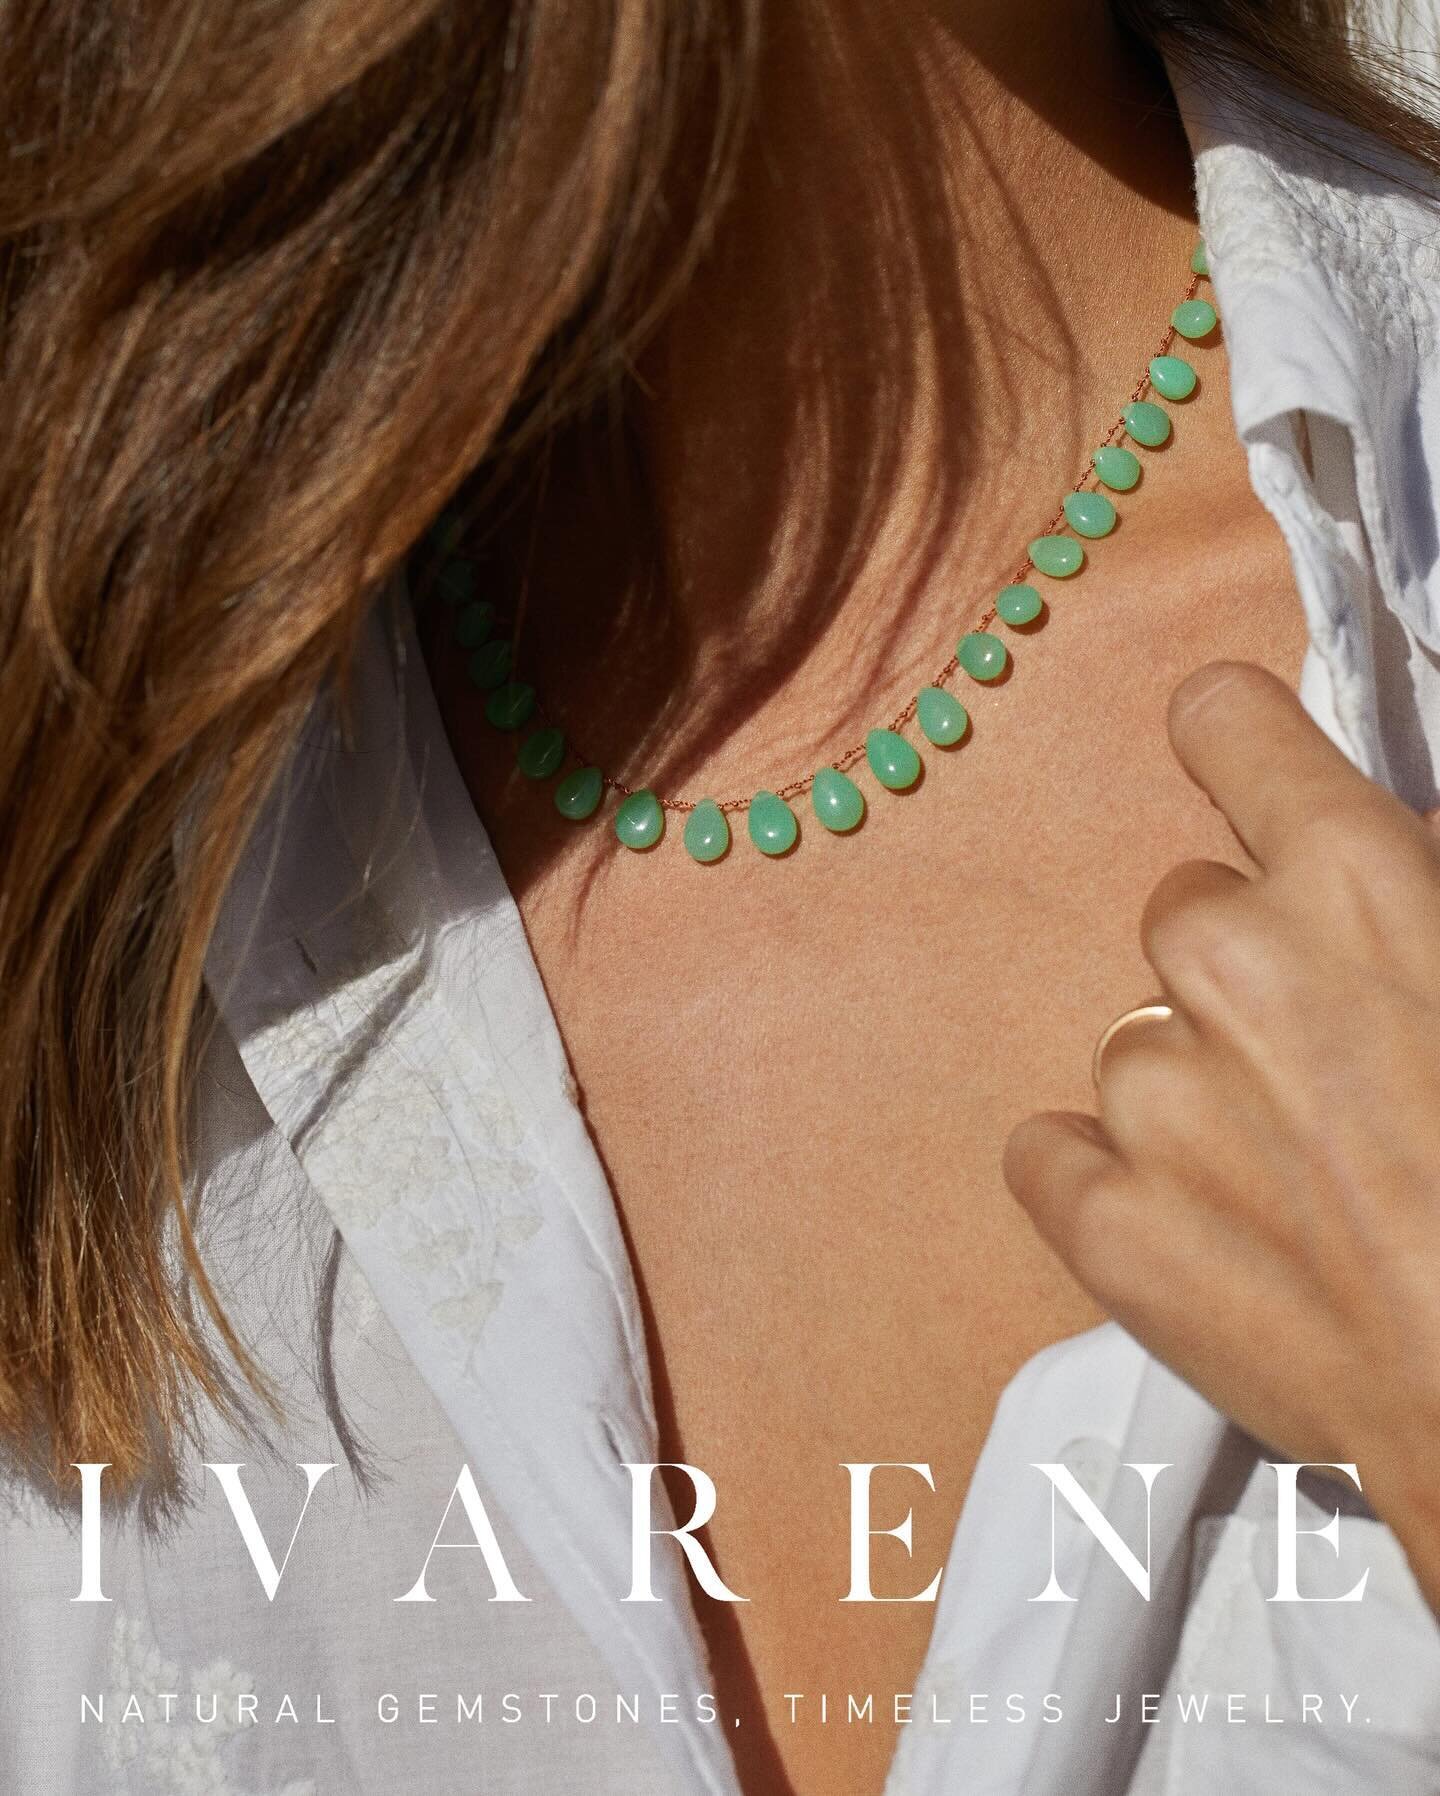 We are so excited to introduce @ivarenegems from Paris 🇫🇷! The meticulously selected vibrant and untreated semiprecious stones are hand strung on a silky nylon cord and held together by a 14k gold filled clasp. This technique creates the illusion o